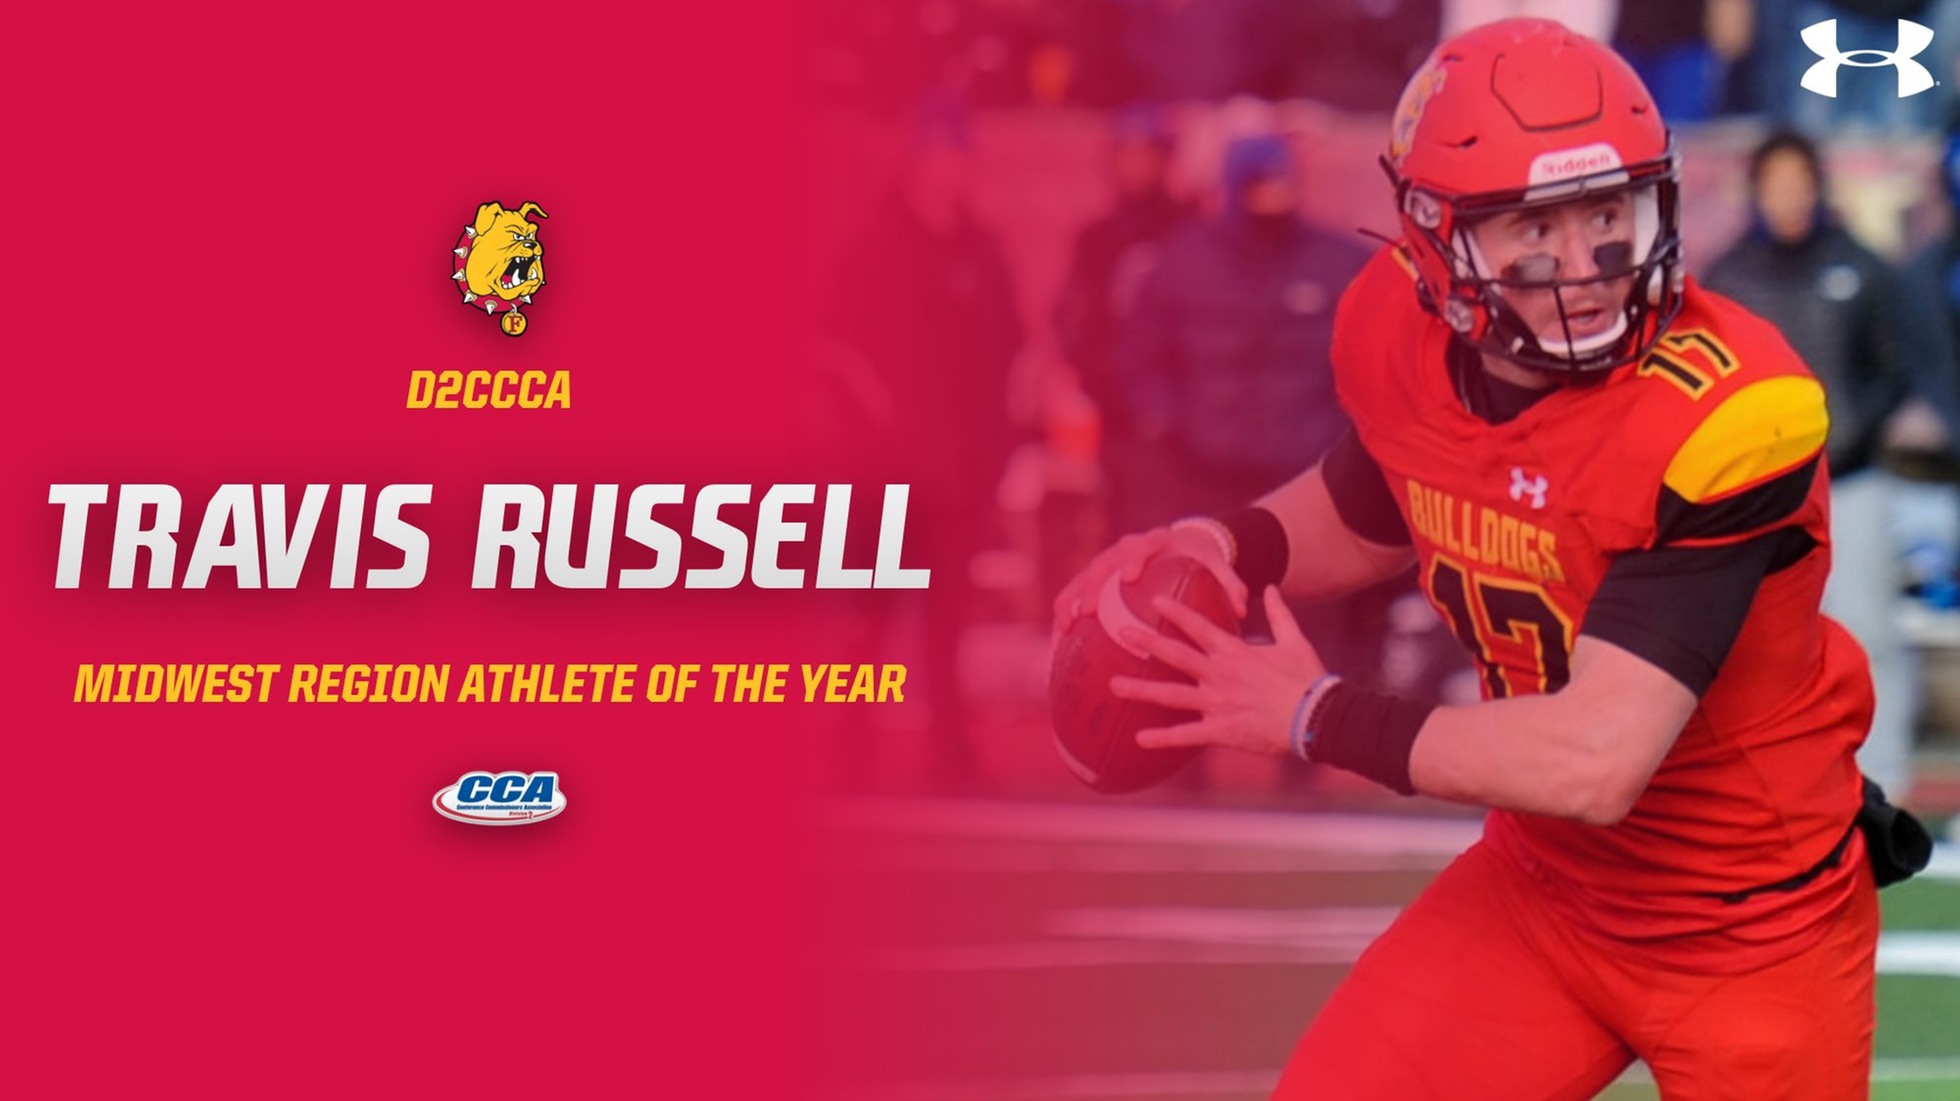 FSU's Travis Russell Tabbed As D2CCA Midwest Region Athlete Of The Year